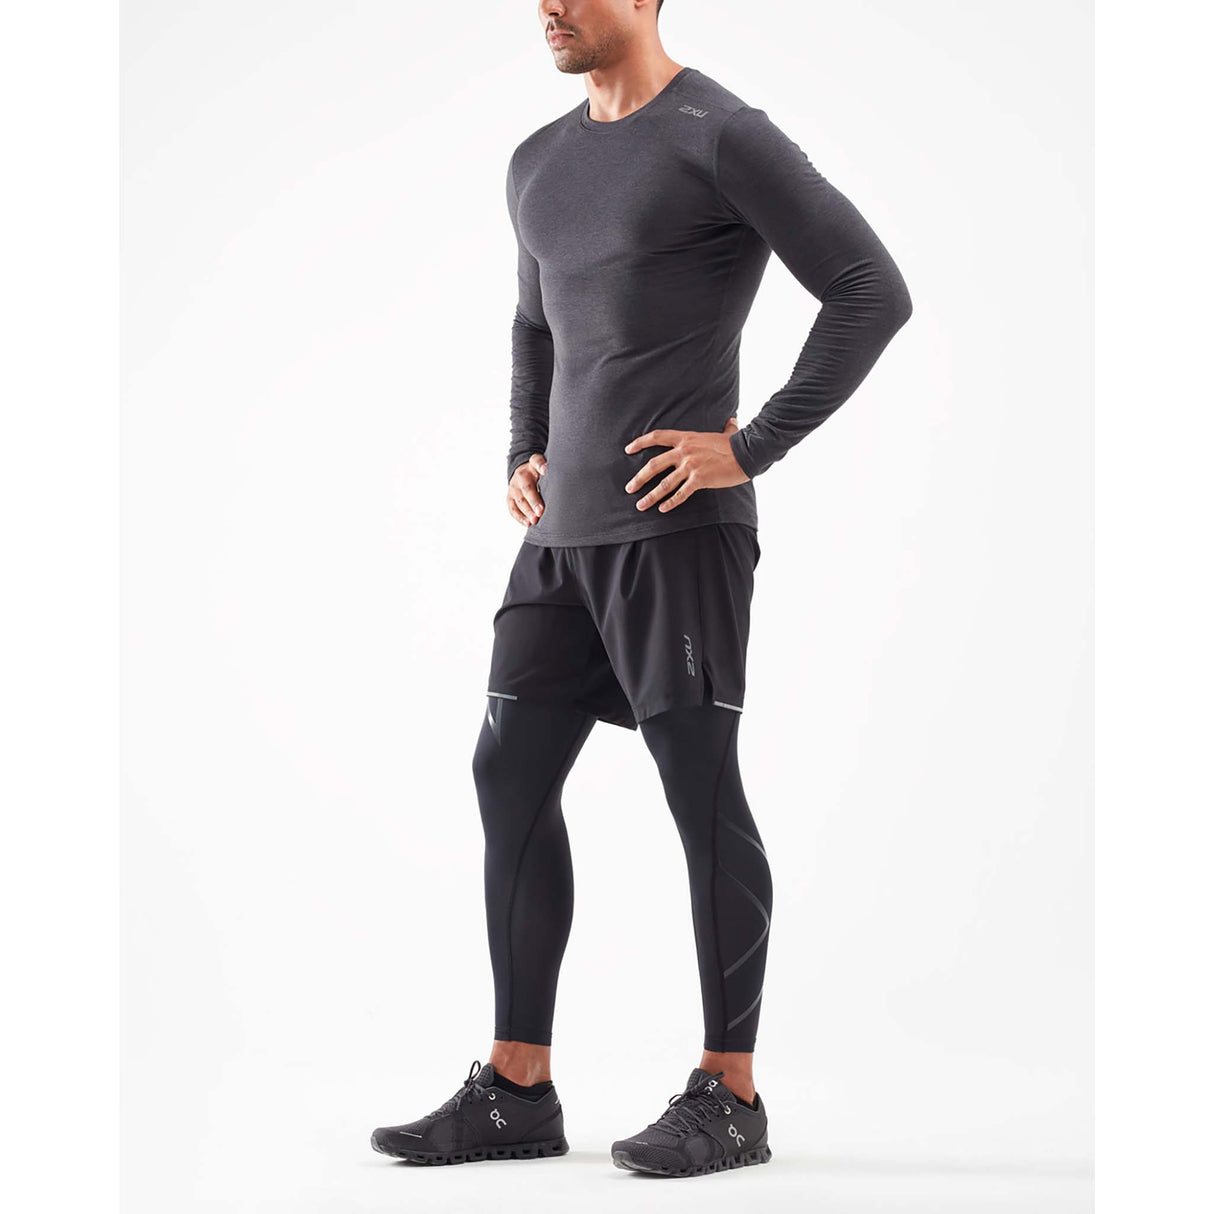 2XU Ignition chandail à manches longues baselayer homme lateral